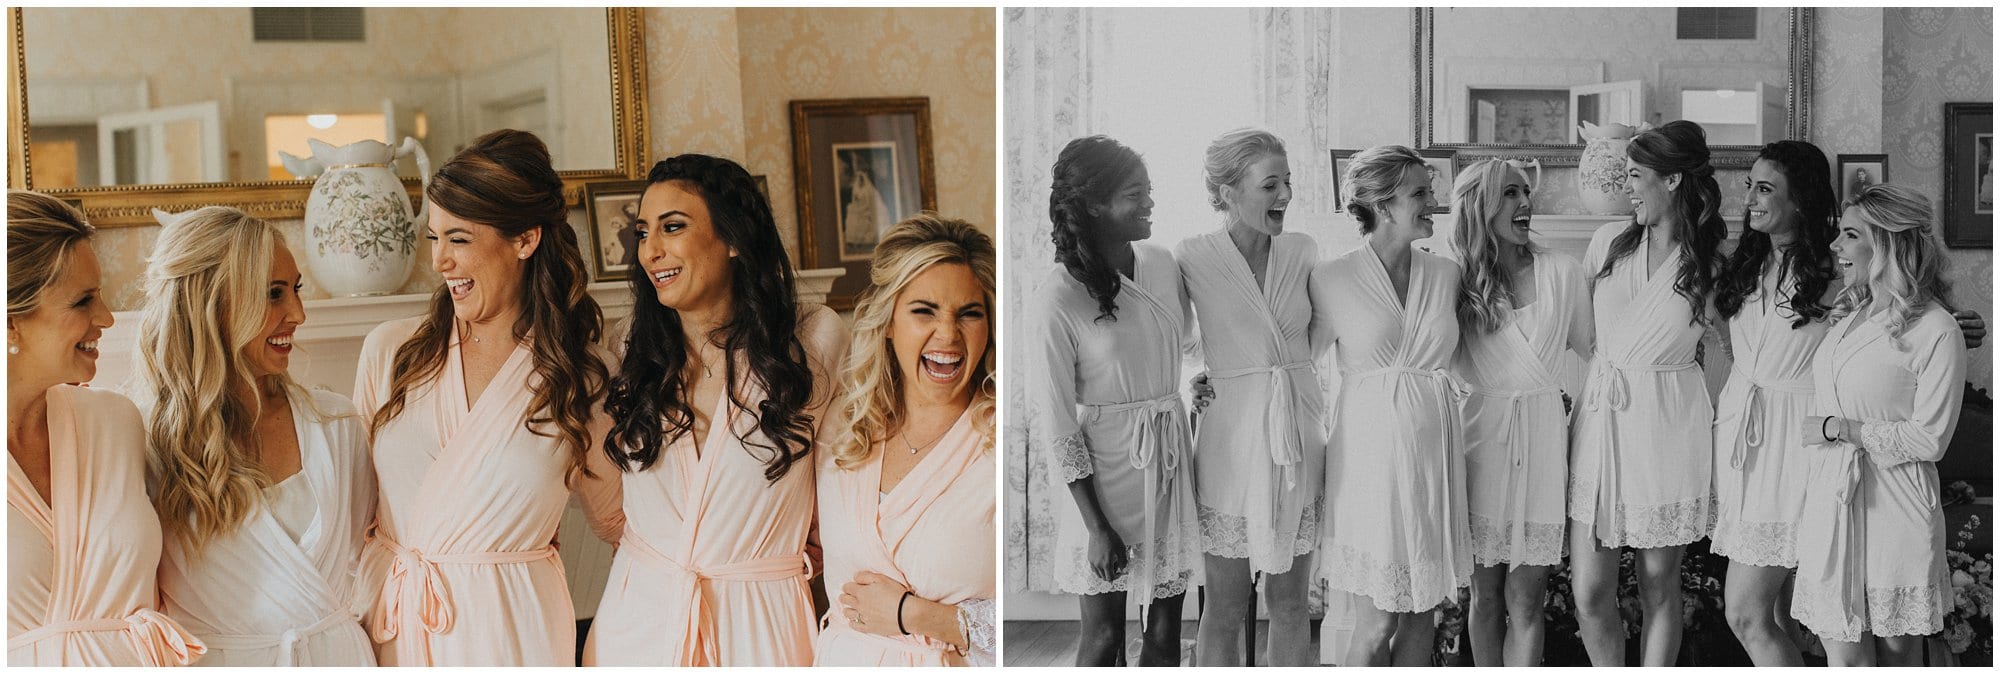 bridesmaids getting ready in robes for wedding